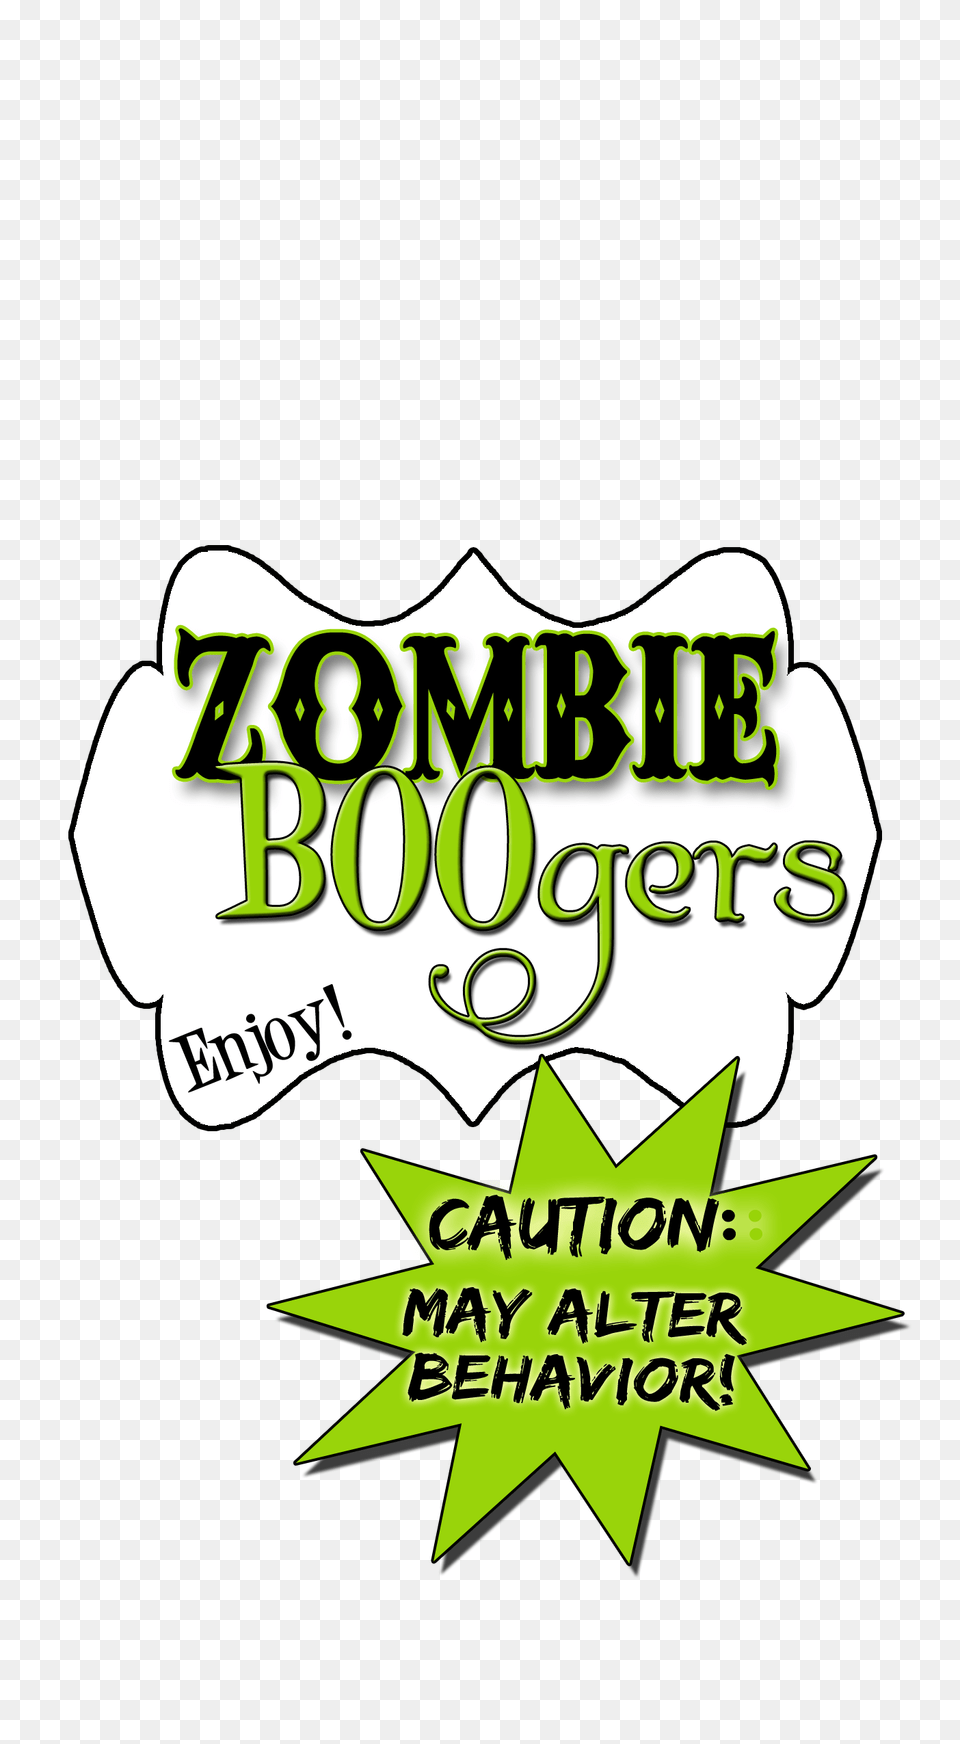 Serving Up Some Zombie Boogers Holiday Halloween Boo, Advertisement, Poster, Logo, Symbol Png Image